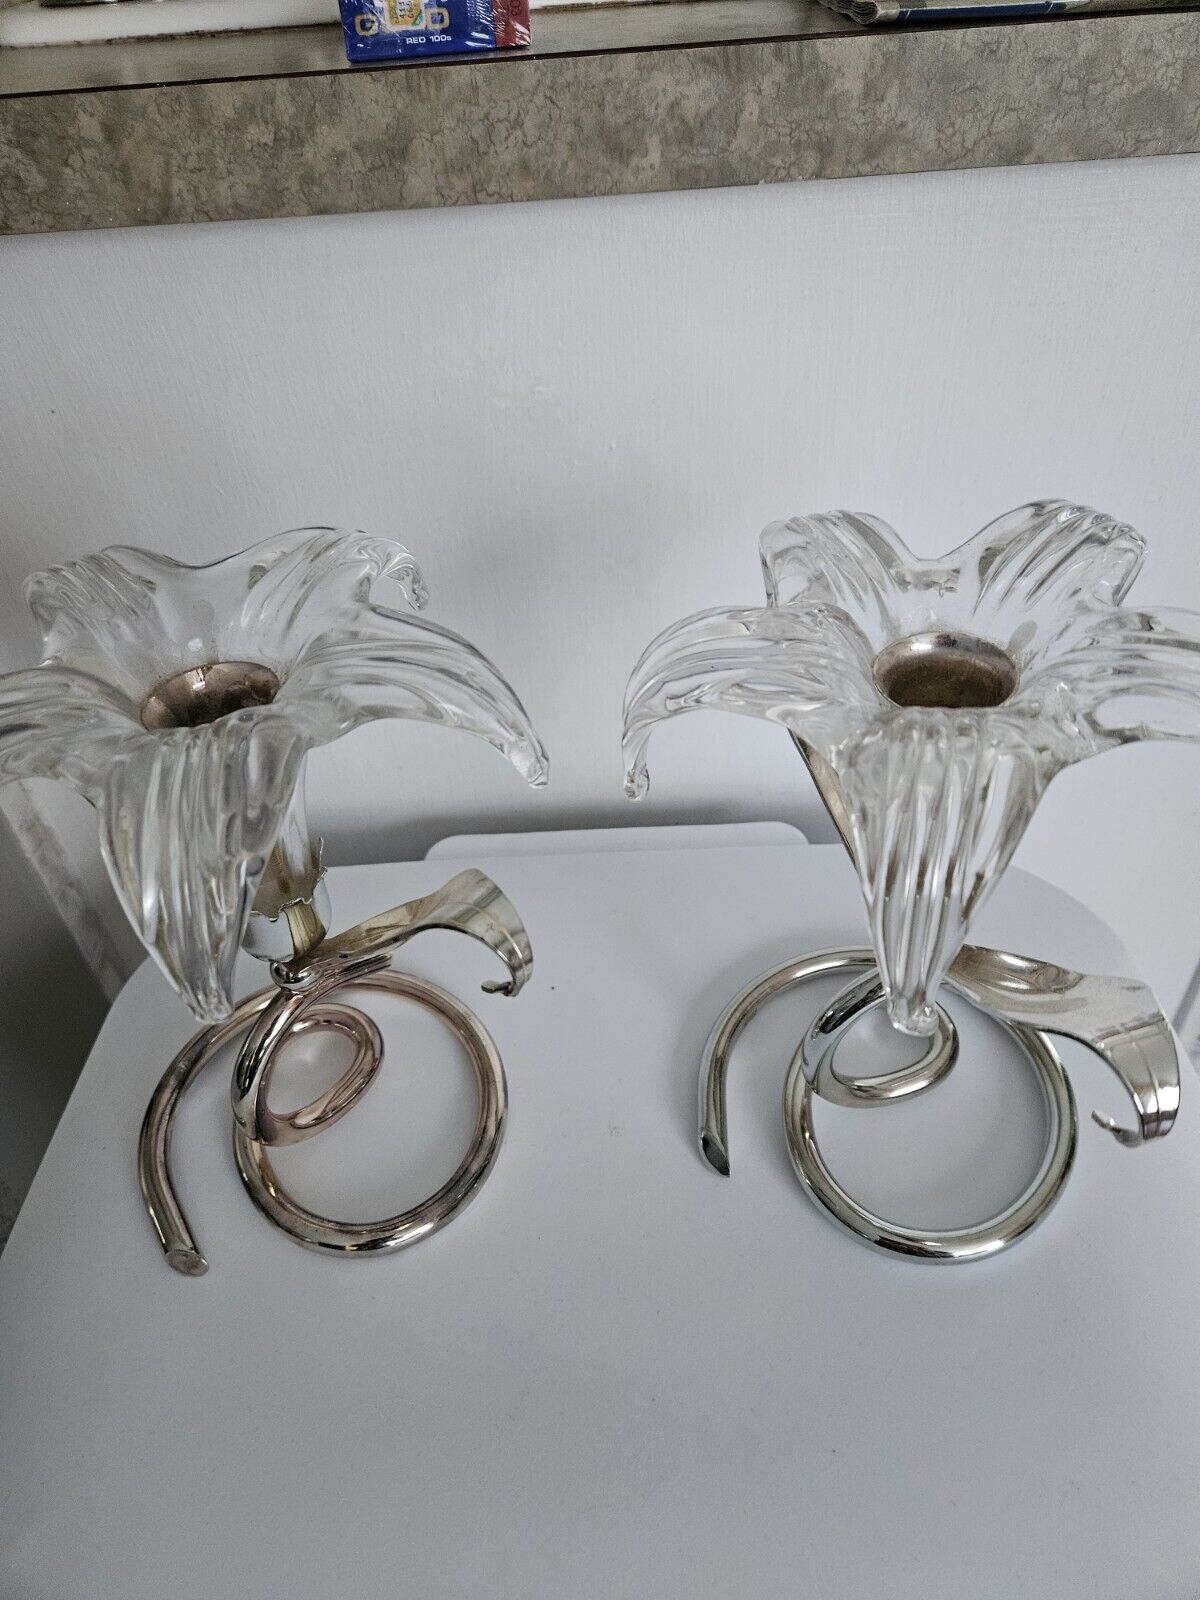 Vintage Oneida Silversmith Candlestick Holder Silver Plated Set of Two EUC